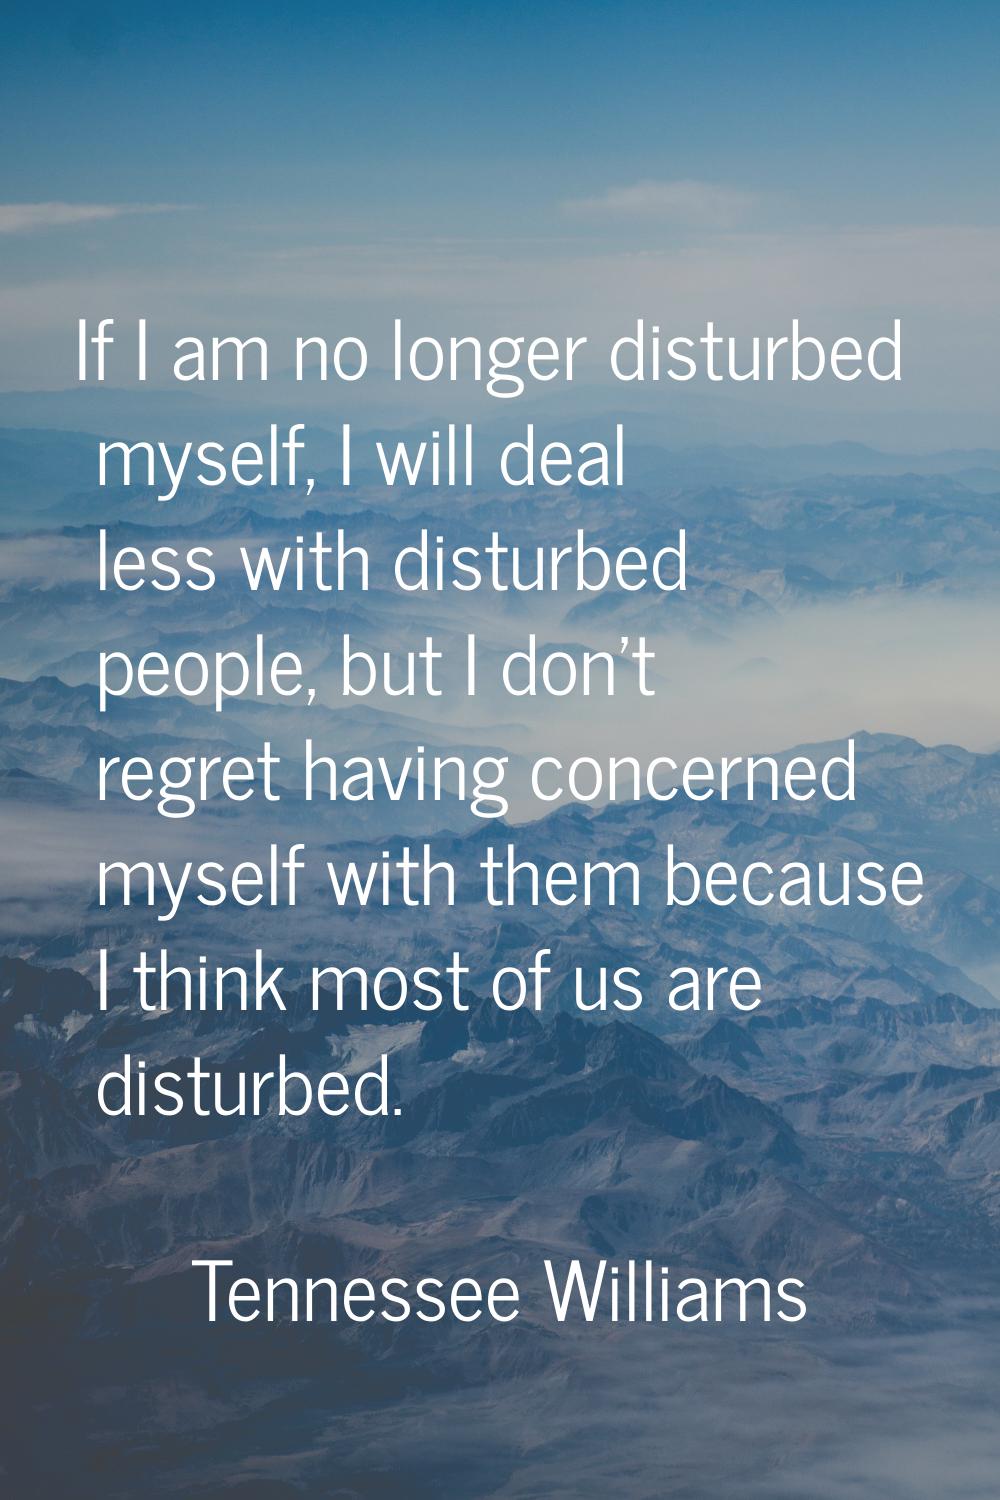 If I am no longer disturbed myself, I will deal less with disturbed people, but I don't regret havi